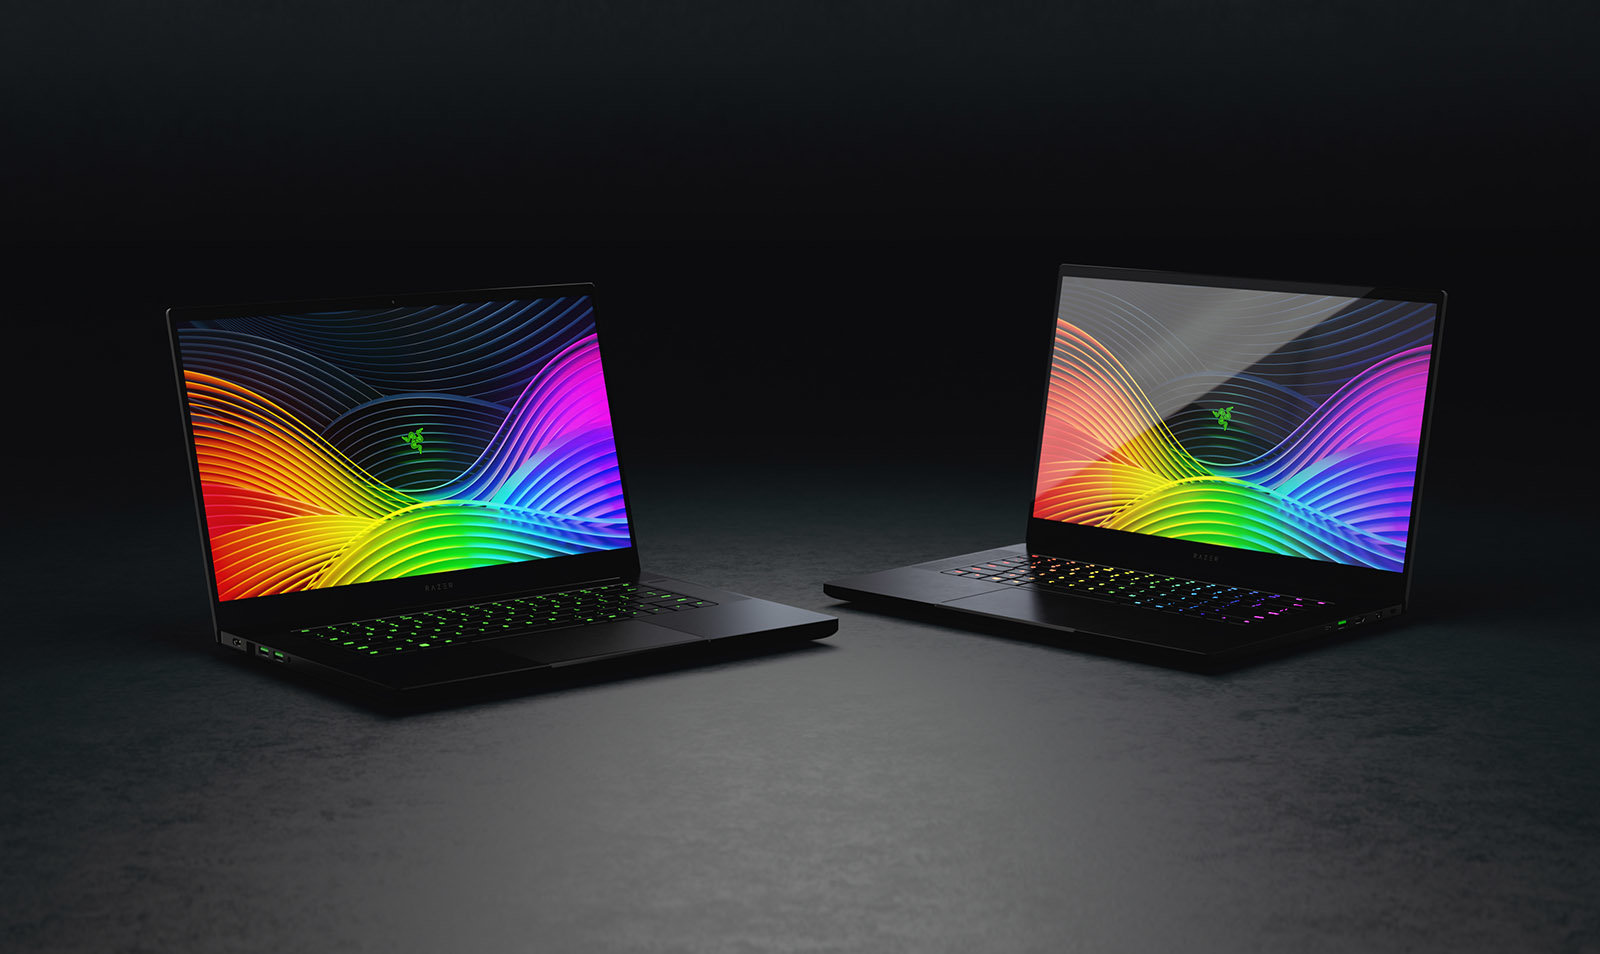 Razer Blade 15 is a 4K gaming laptop with a crazy price tag